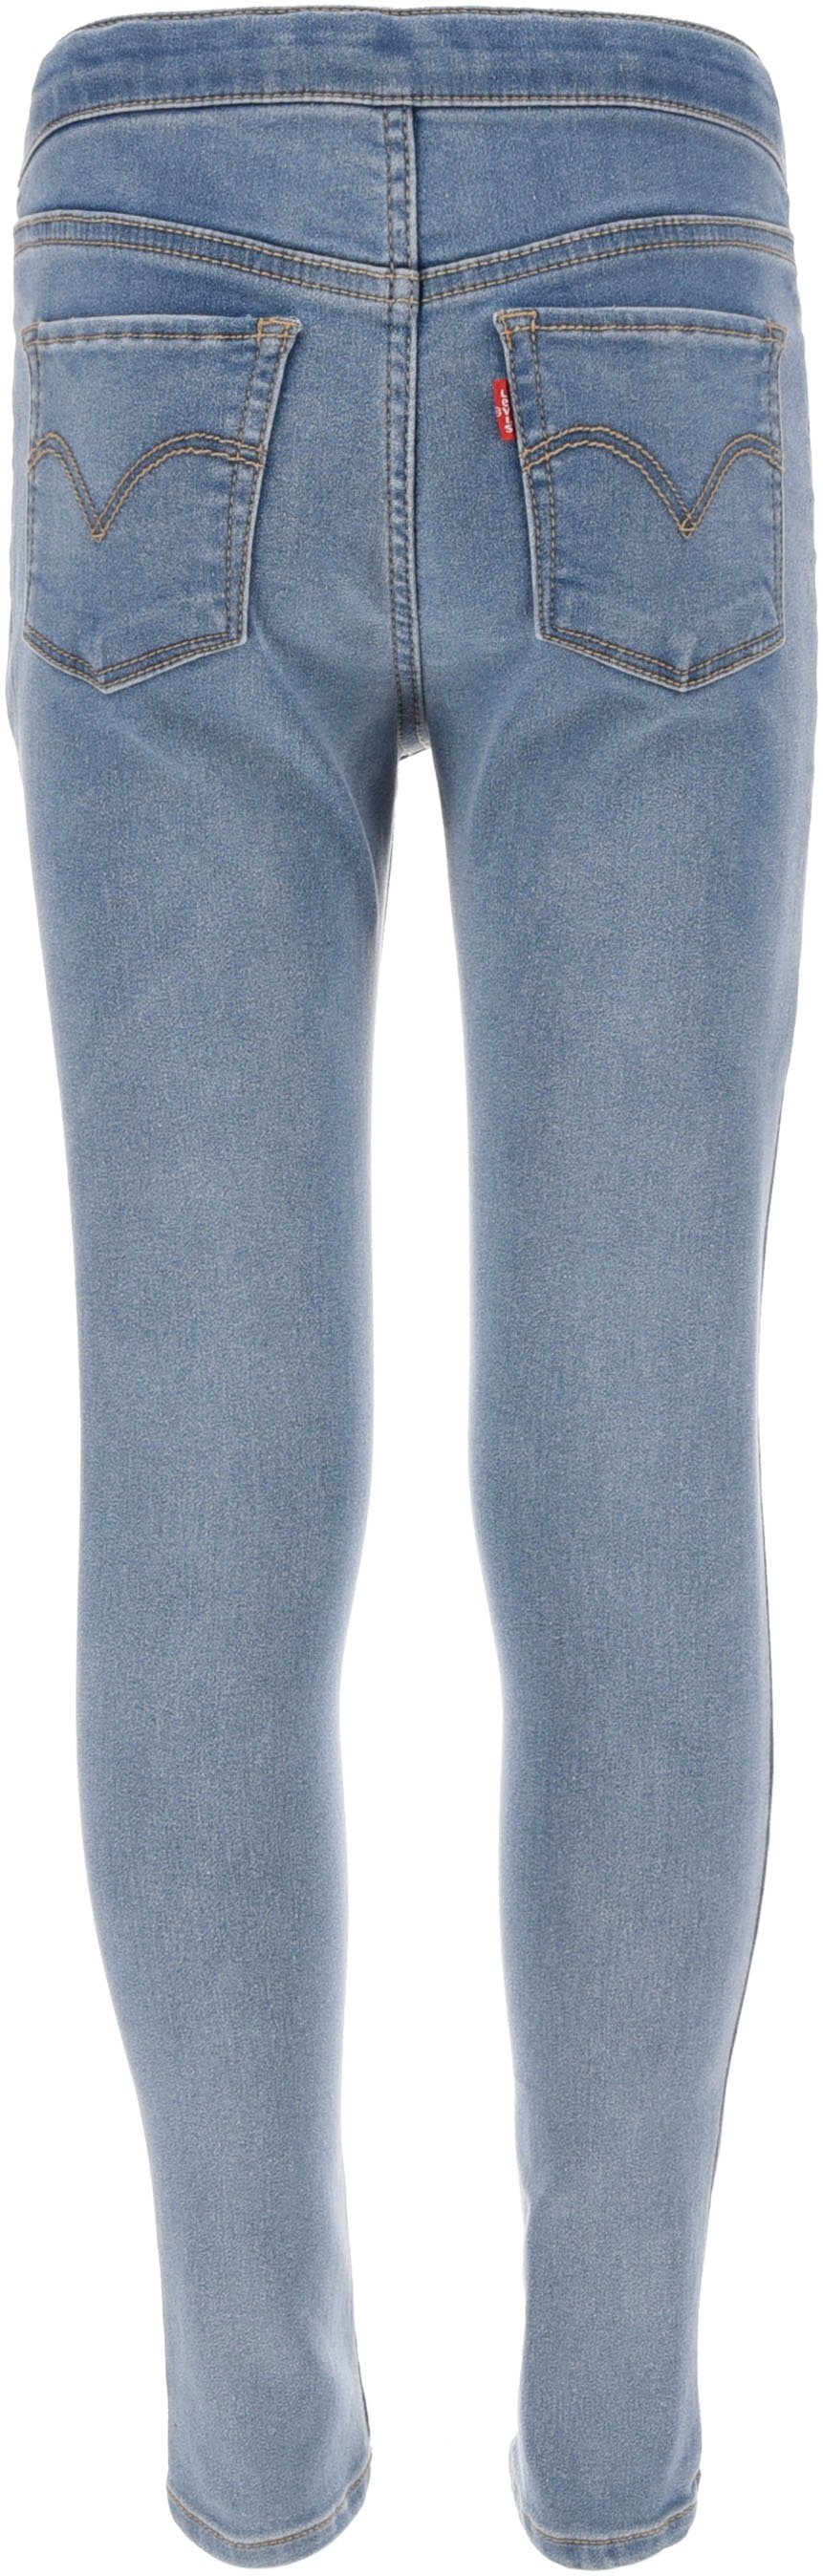 Levi's® Kids Jeansjeggings PULL-ON vices for GIRLS LEGGINGS miami